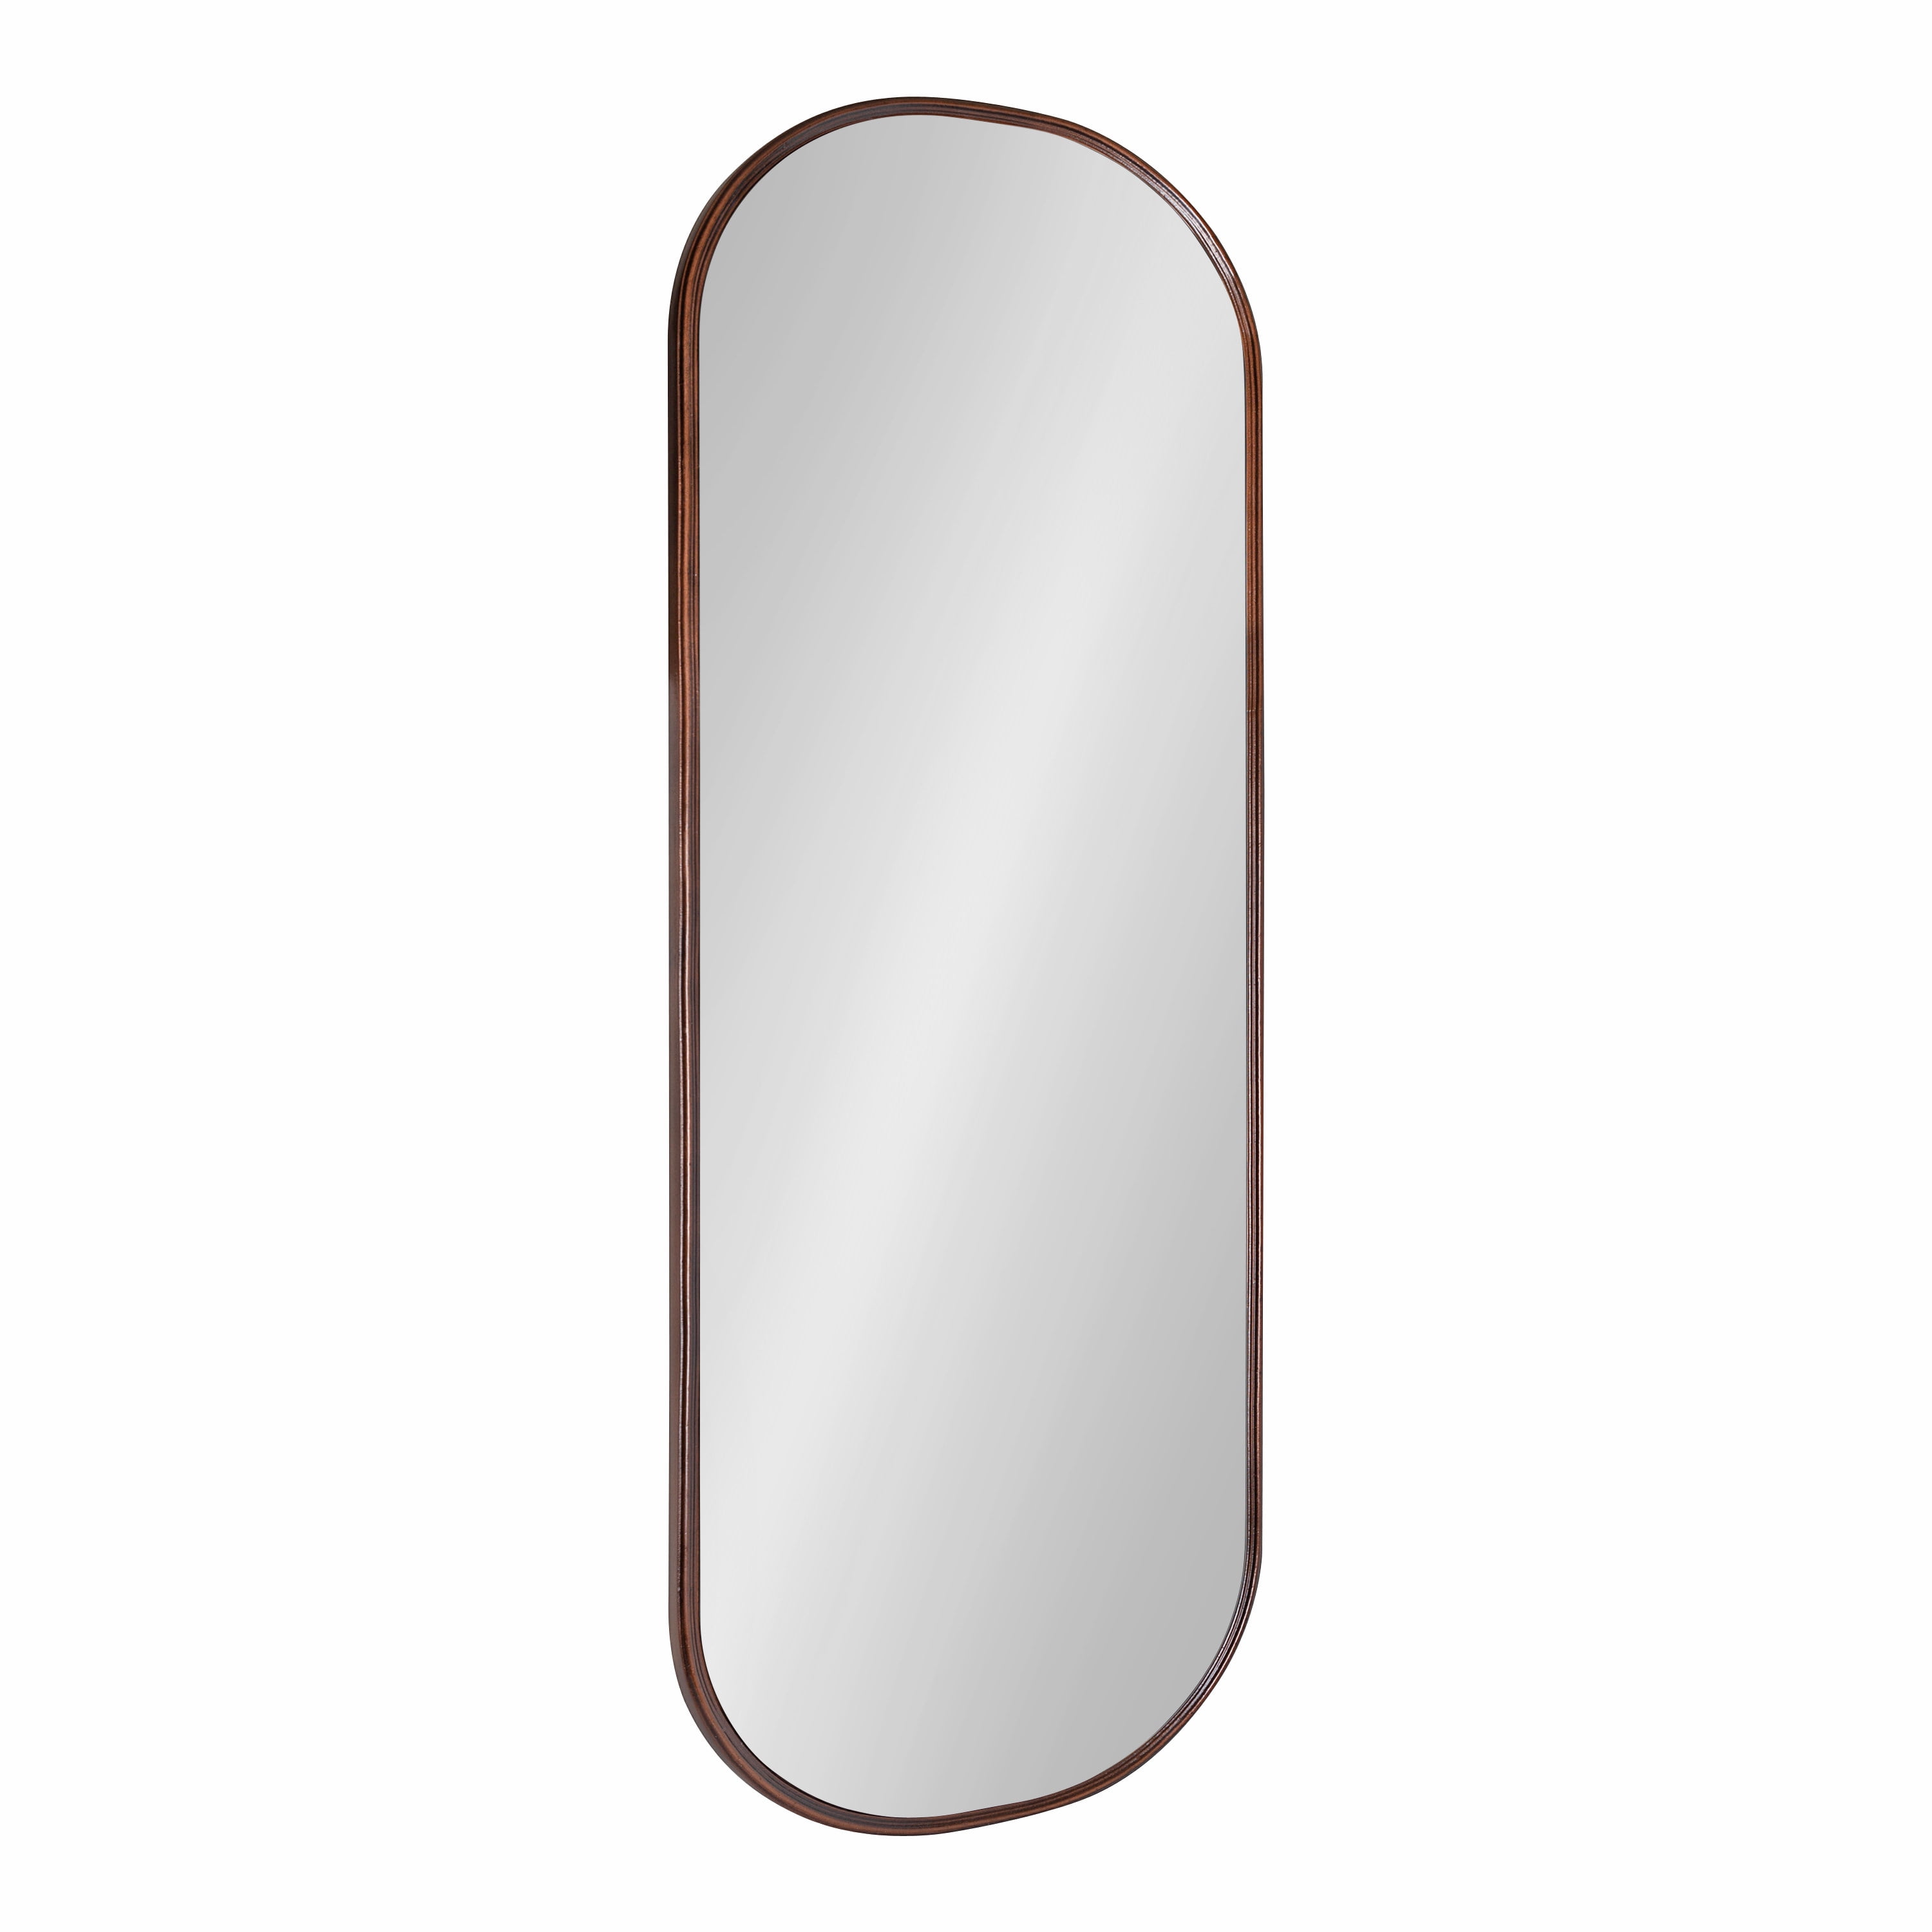 Kate and Laurel Caskill Modern Framed Capsule Mirror, 16 x 48, Bronze,  Decorative Oval Accent Mirror for Wall